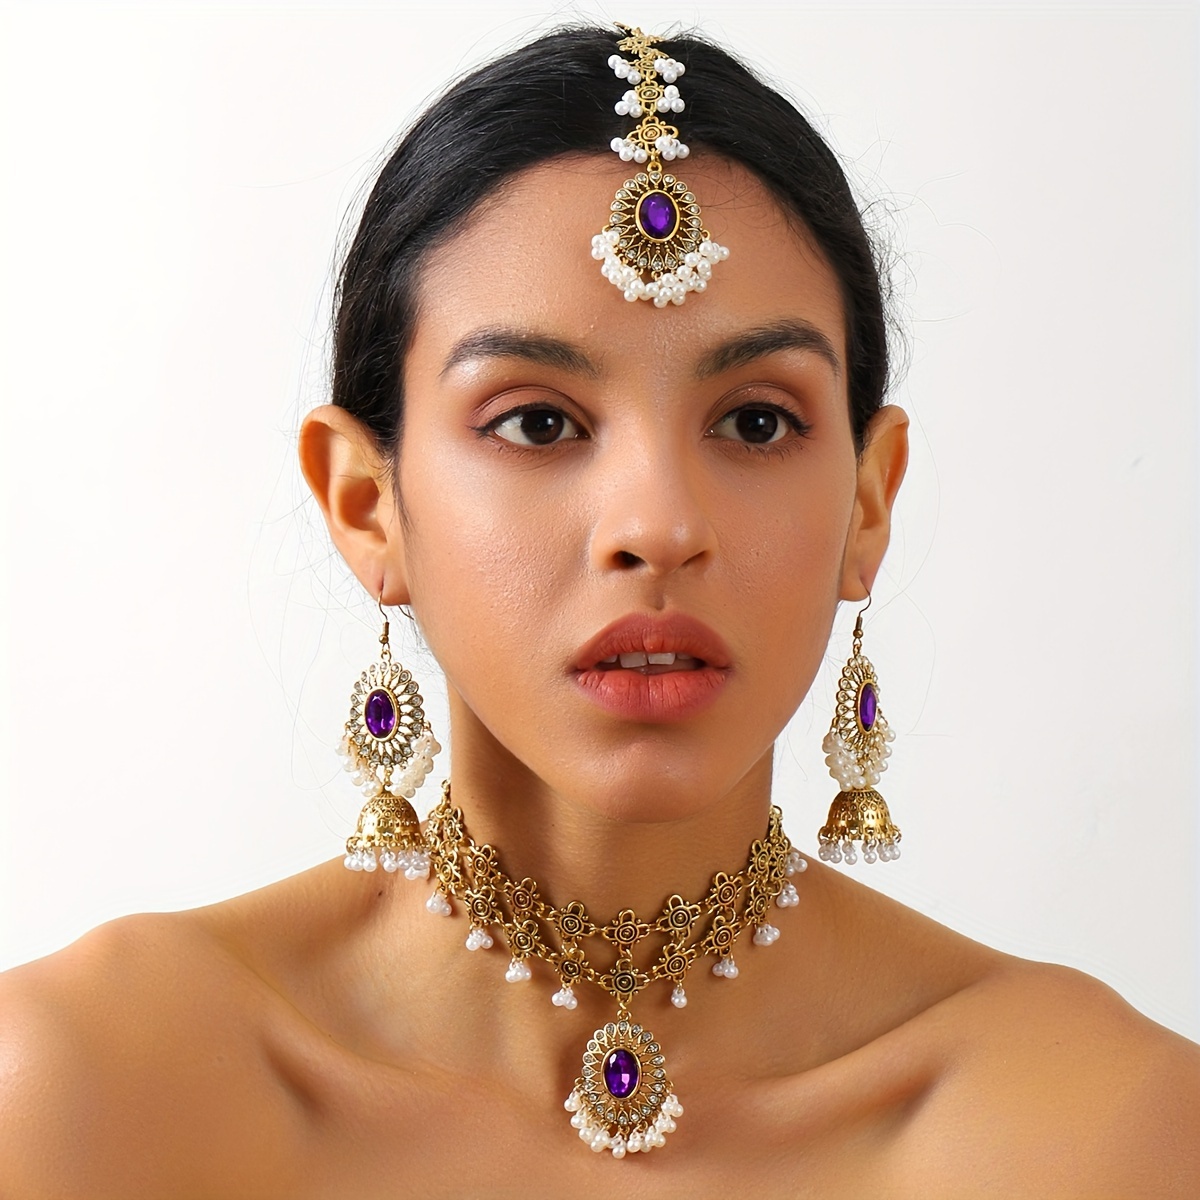 

Fashion Middle Eastern Jewelry Set, Bollywood Style Vintage Oval Rhinestone Embedded Choker Necklace, Dangle Earrings, And Beads Tassel Head Chain, Delicate Jewelry Set Gifts For Eid